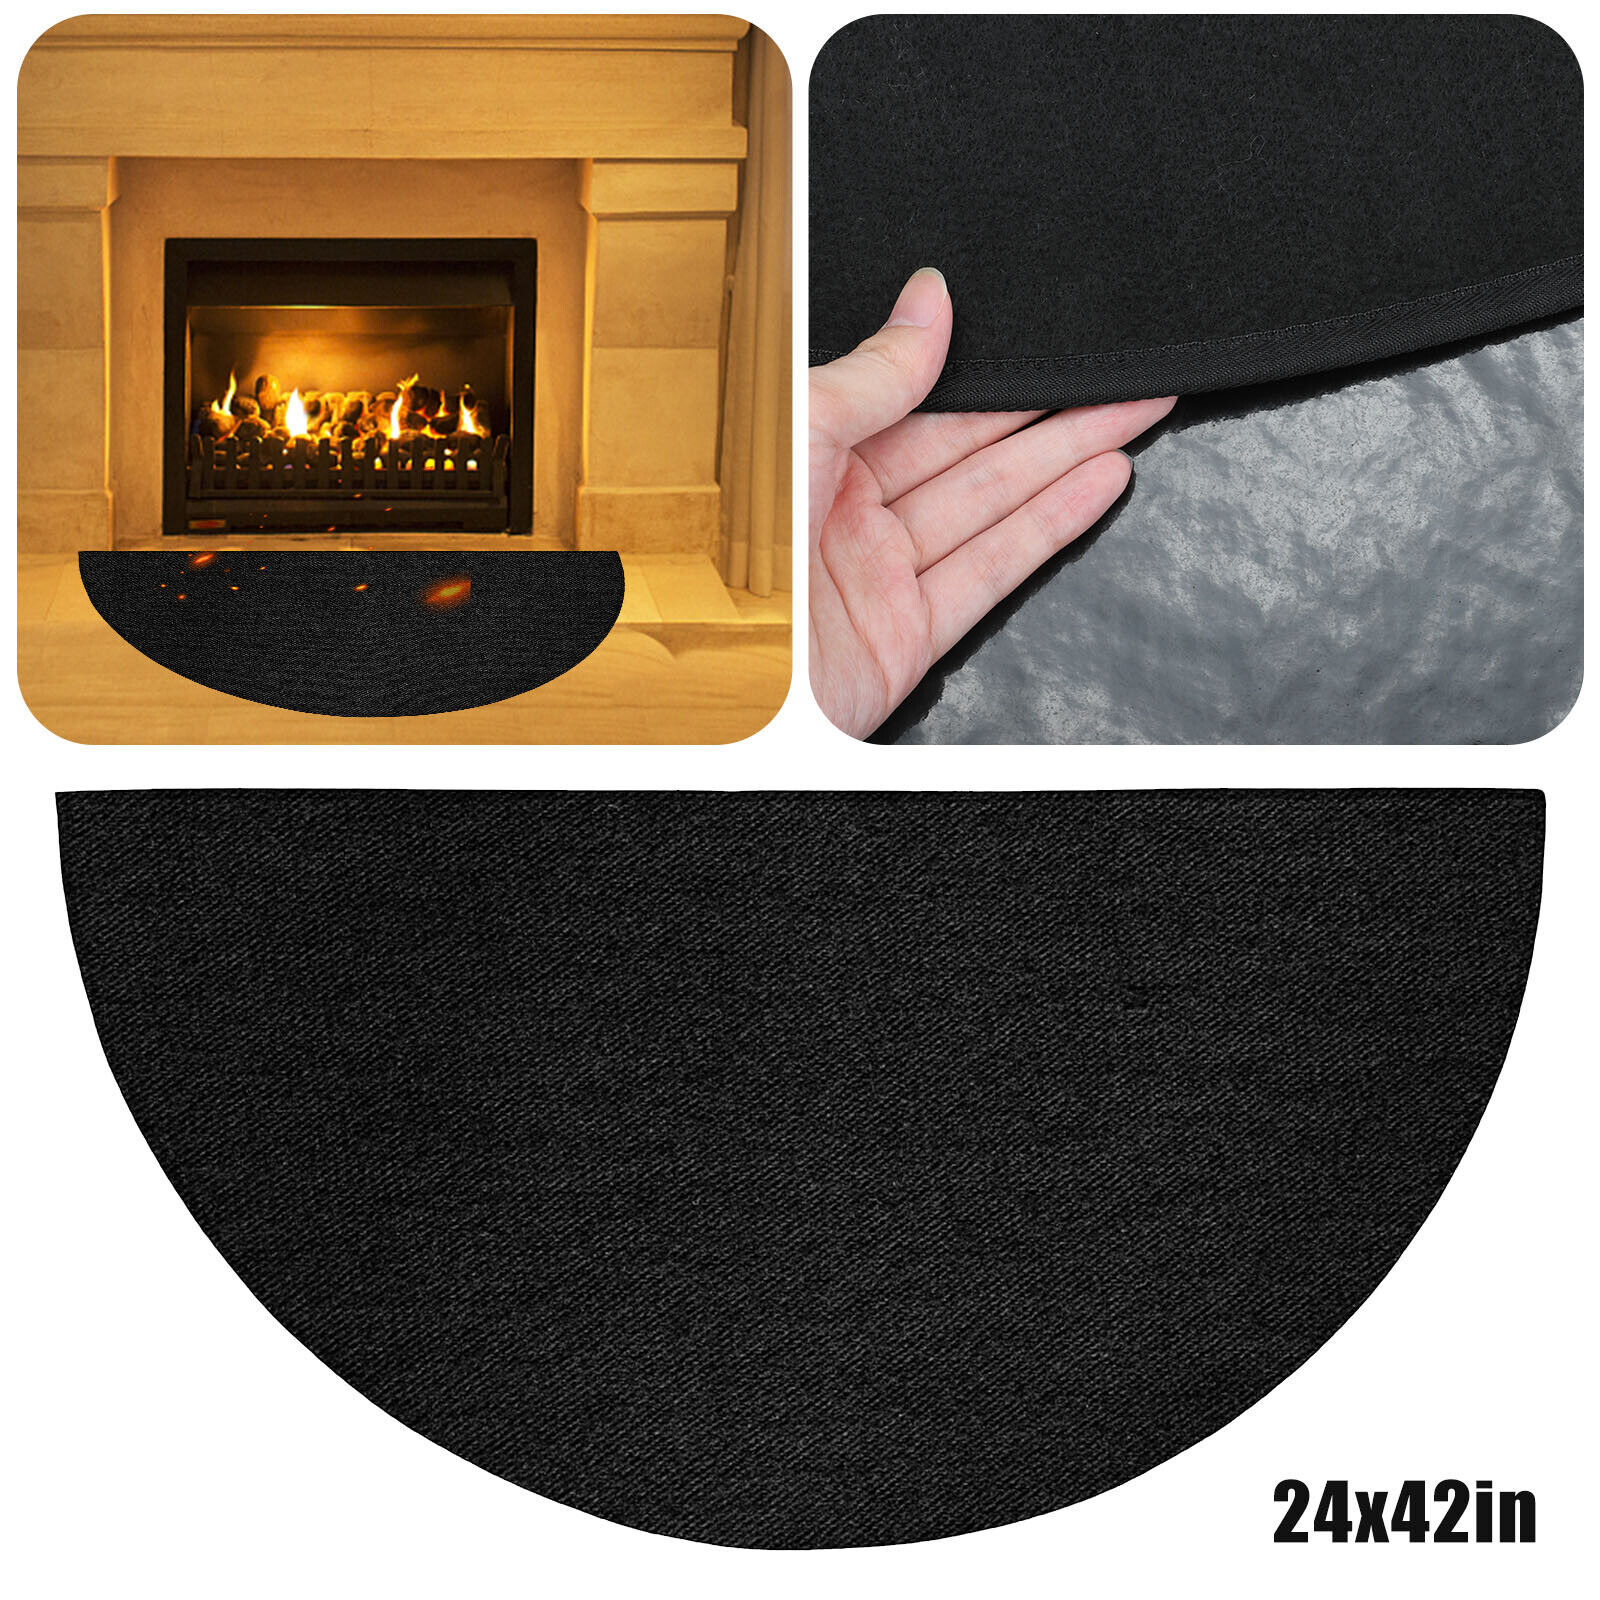 Primary image for Fireproof Fireplace Hearth Rug Non Slip Protection Mat Floor Flame Resistant Pad